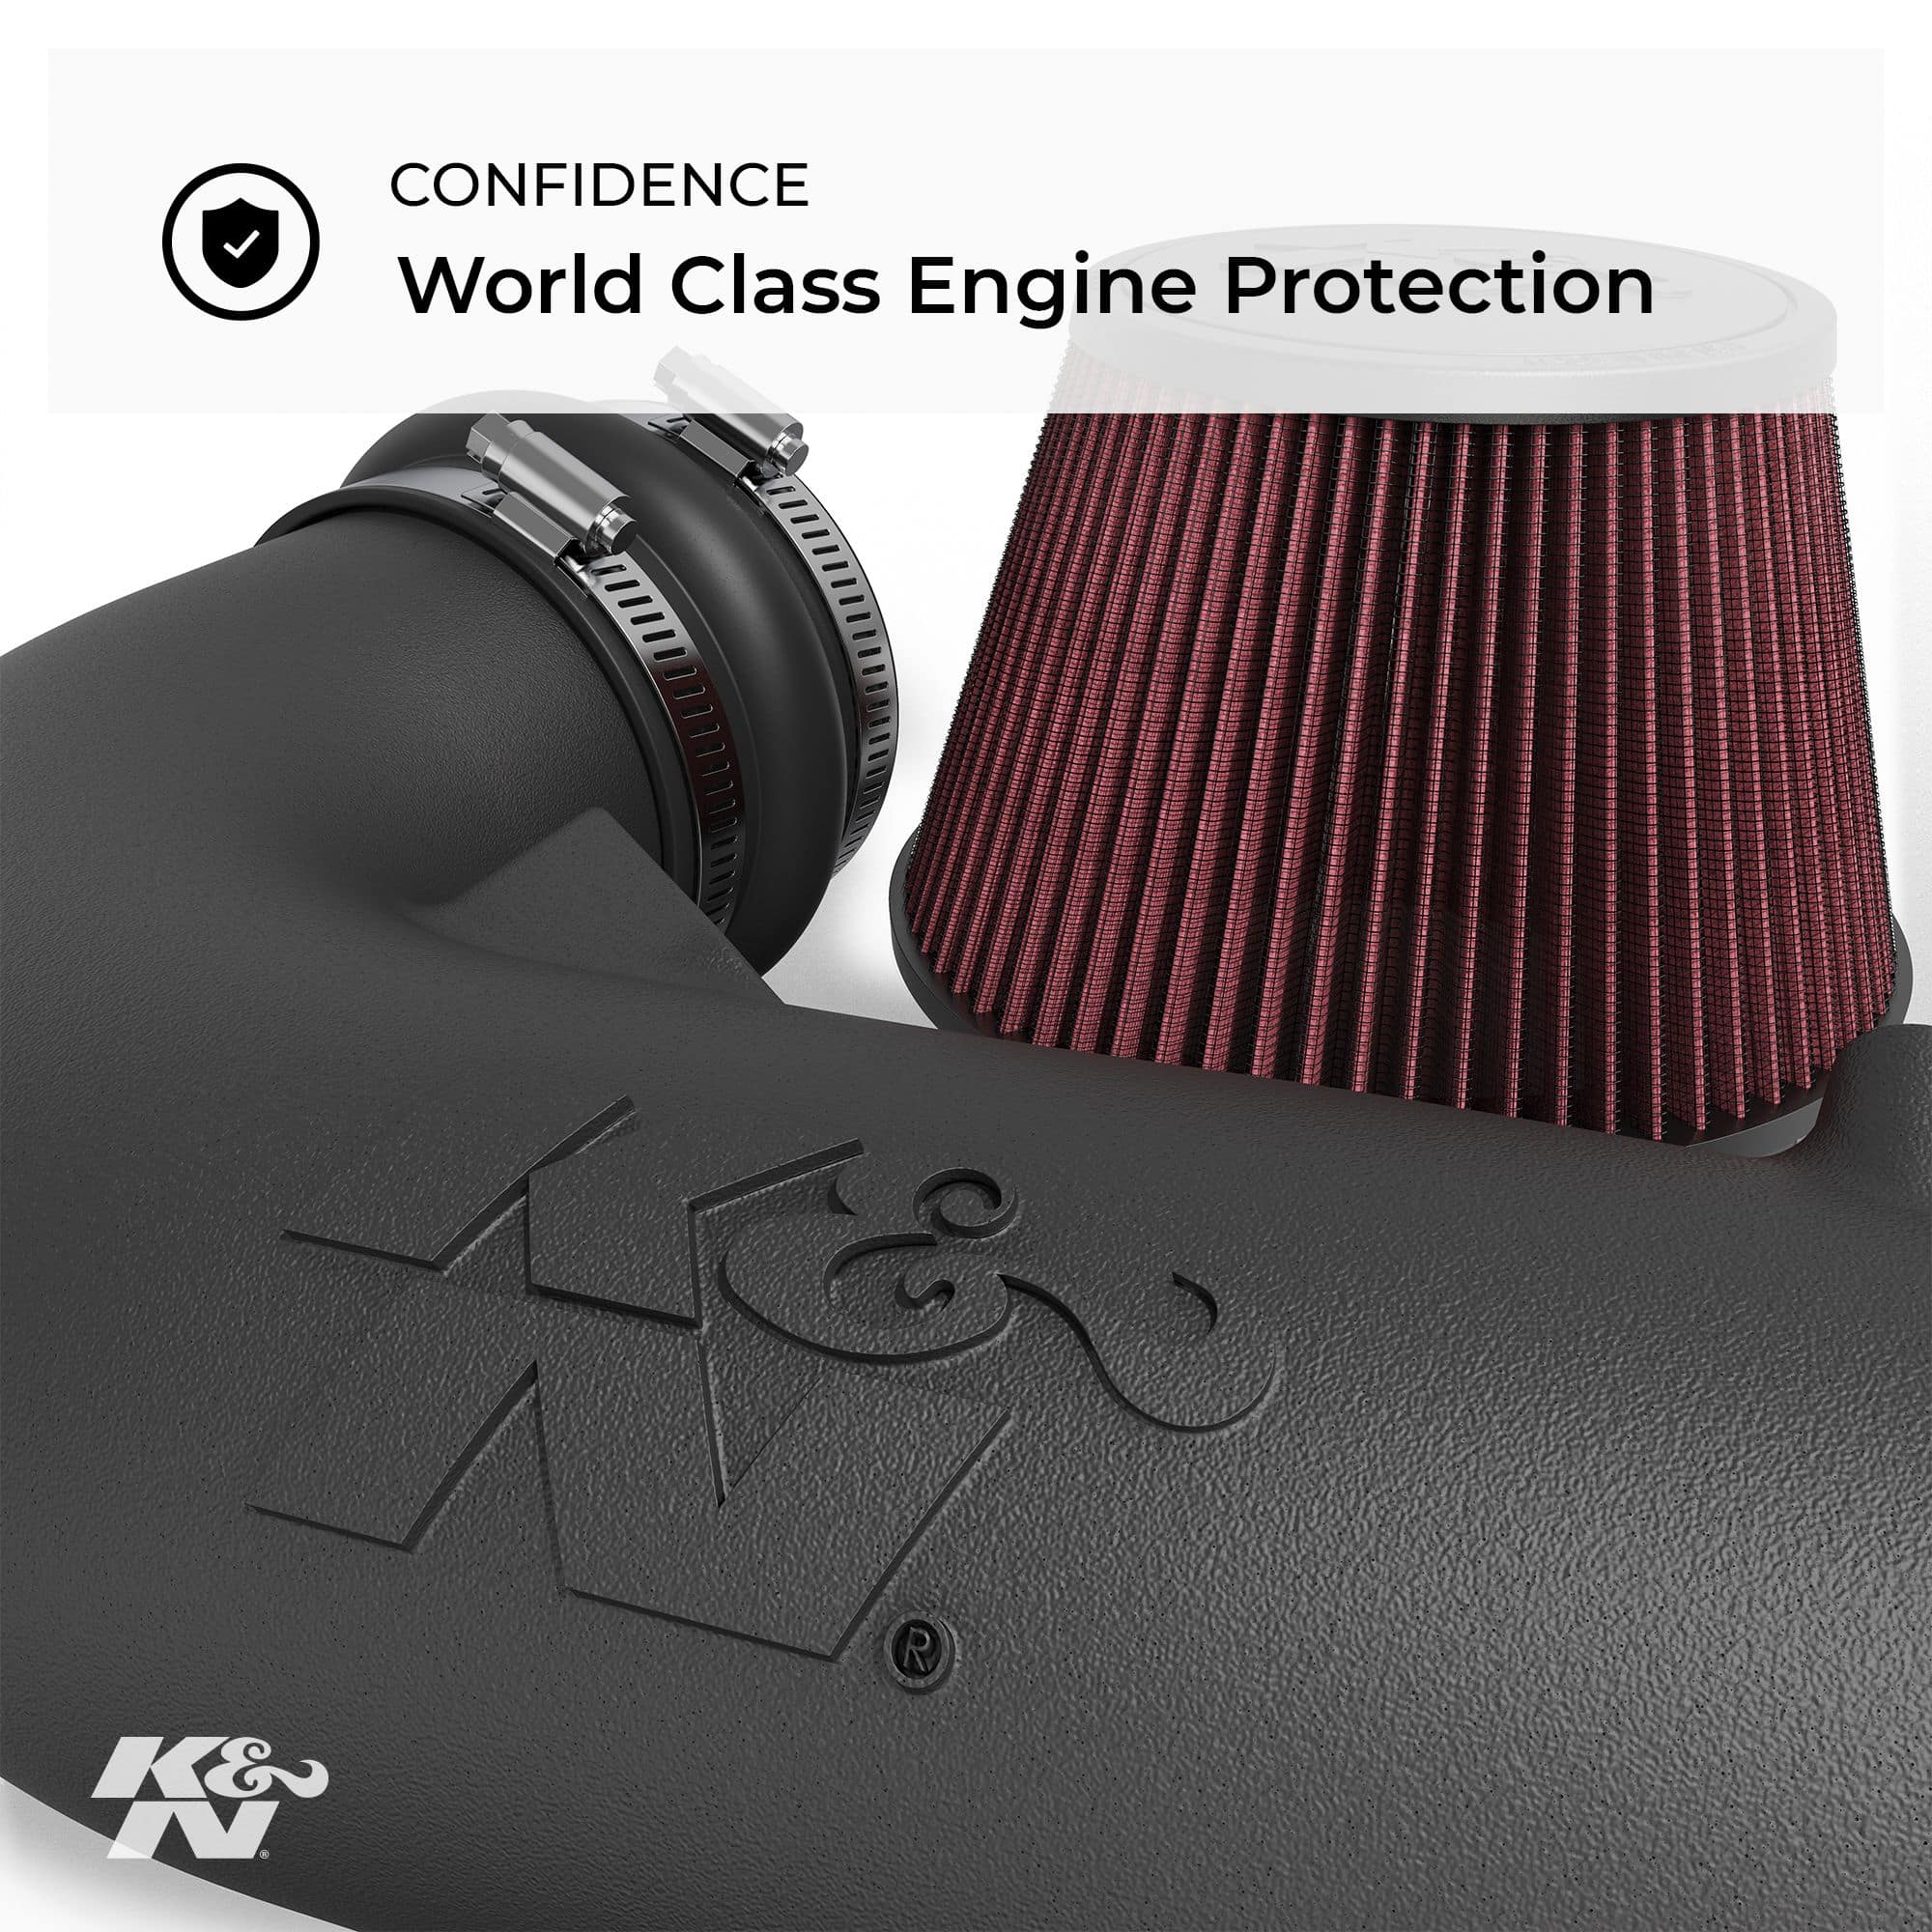 K&N Performance Air Intake System | Canadian Tire